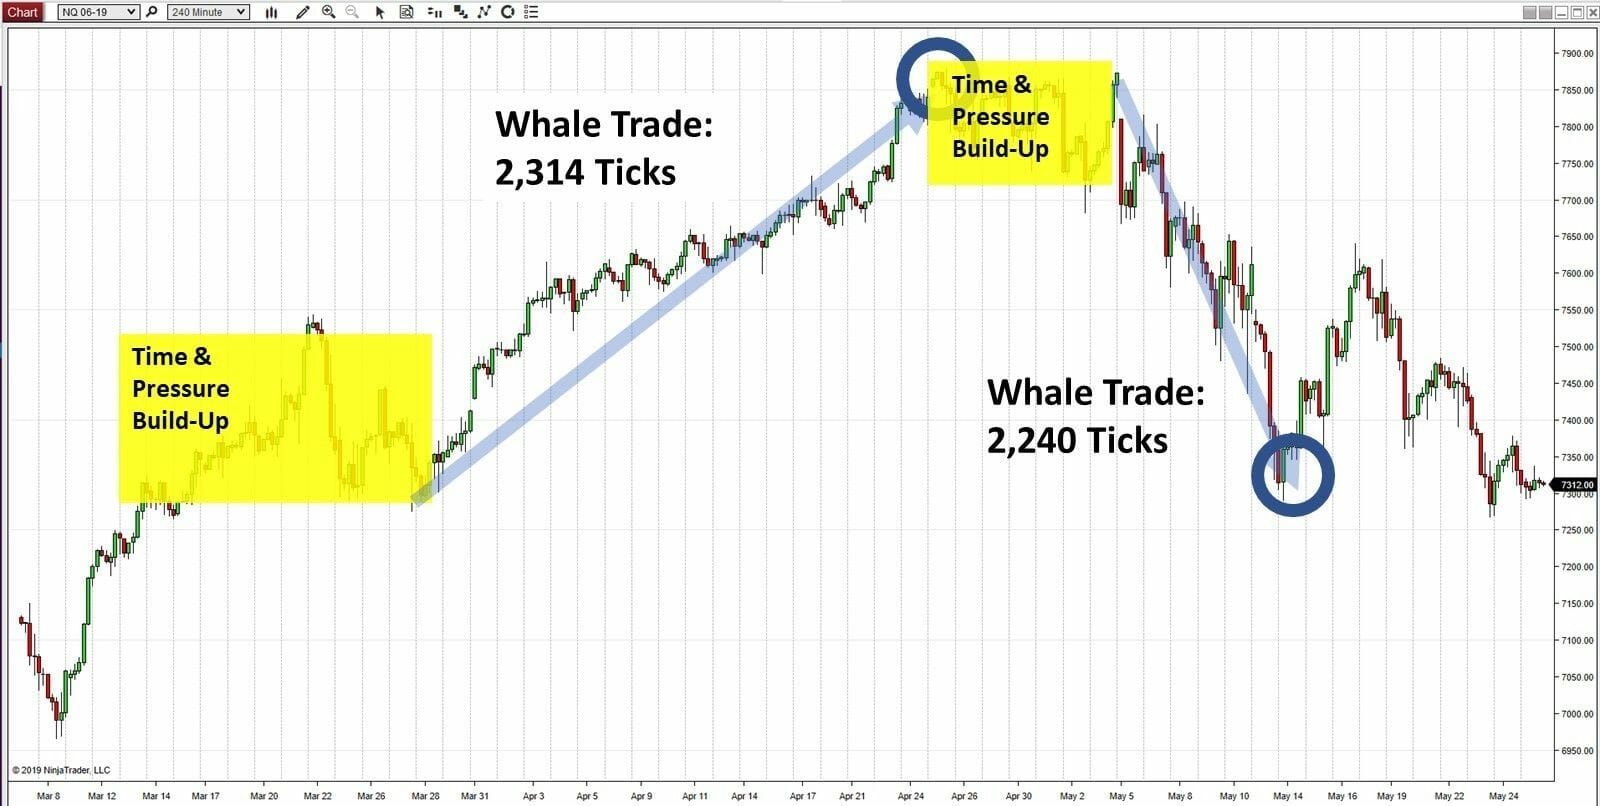 An NQ chart showing a time period of two months with two massive trades of over 2,000 ticks each.